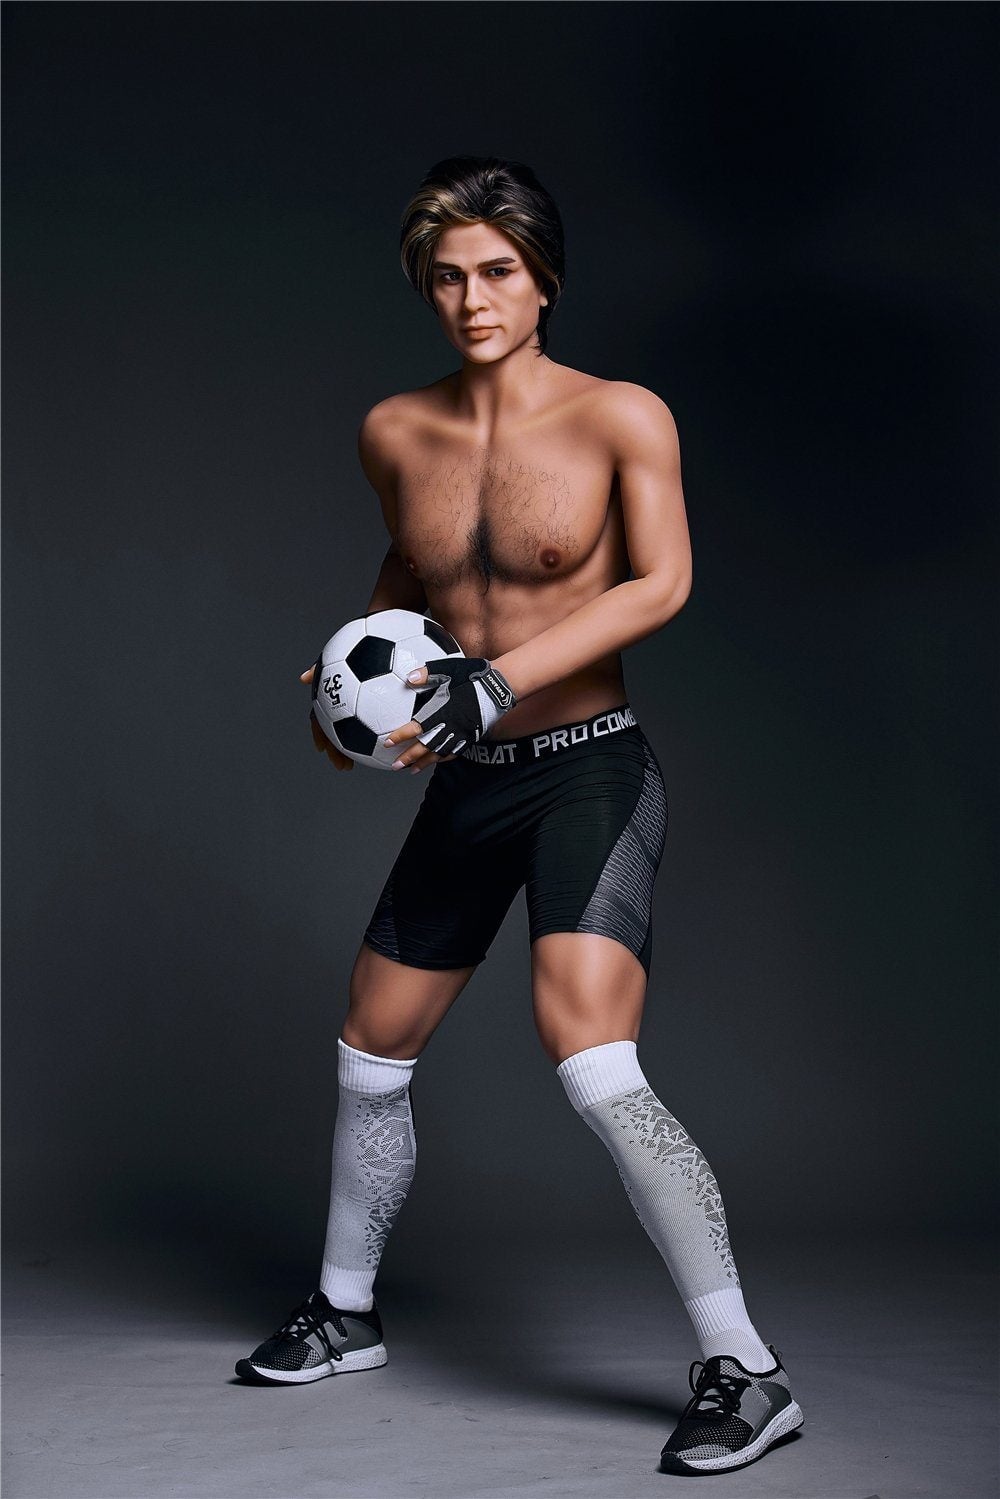 Charles Realistic Male Sex Doll - Iron Tech Doll Irontech Doll